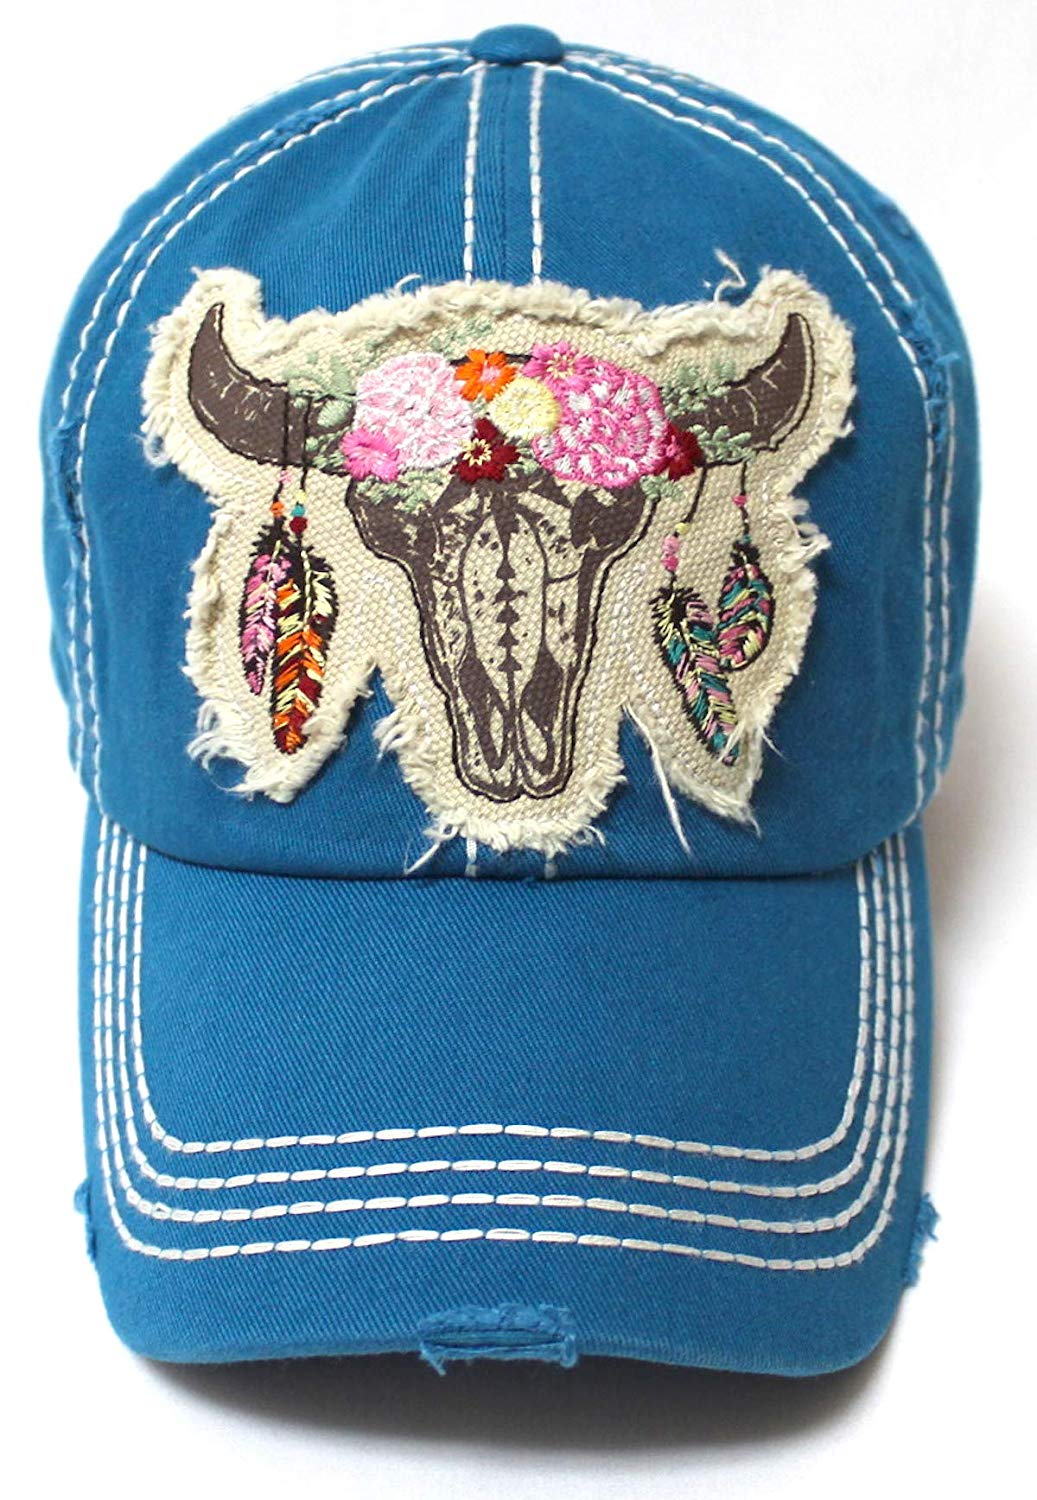 Women's Floral Cow Skull Patch Embroidery Vintage Baseball Hat, Teal Blue - Caps 'N Vintage 